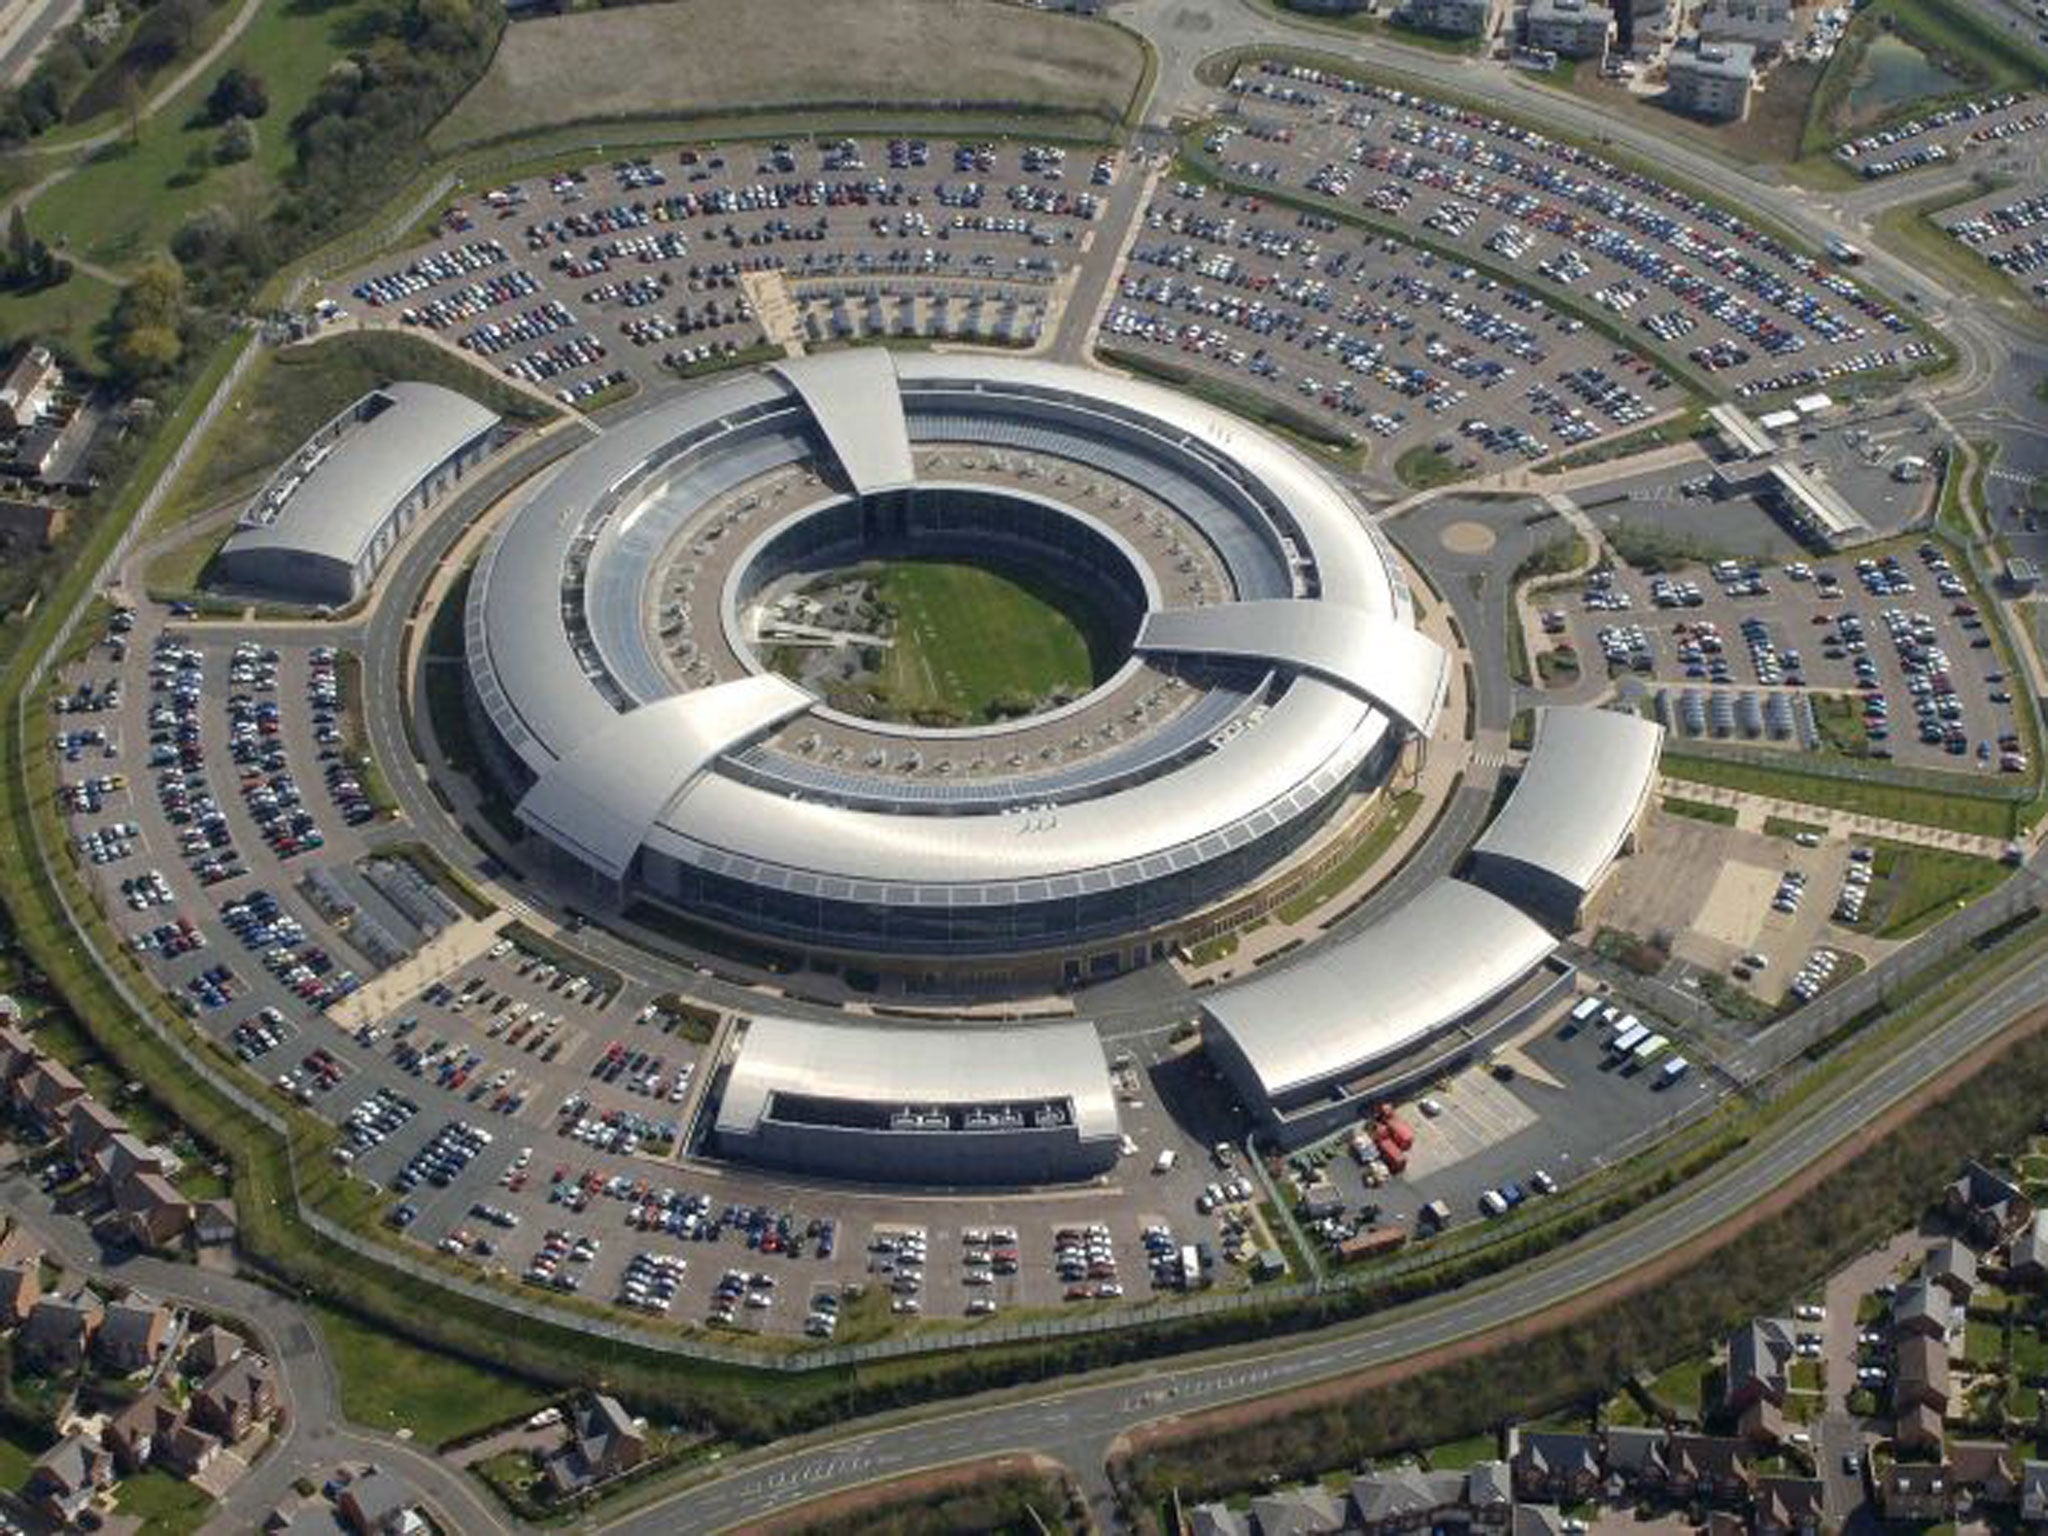 It is claimed that GCHQ has had access to Prism for at least three years